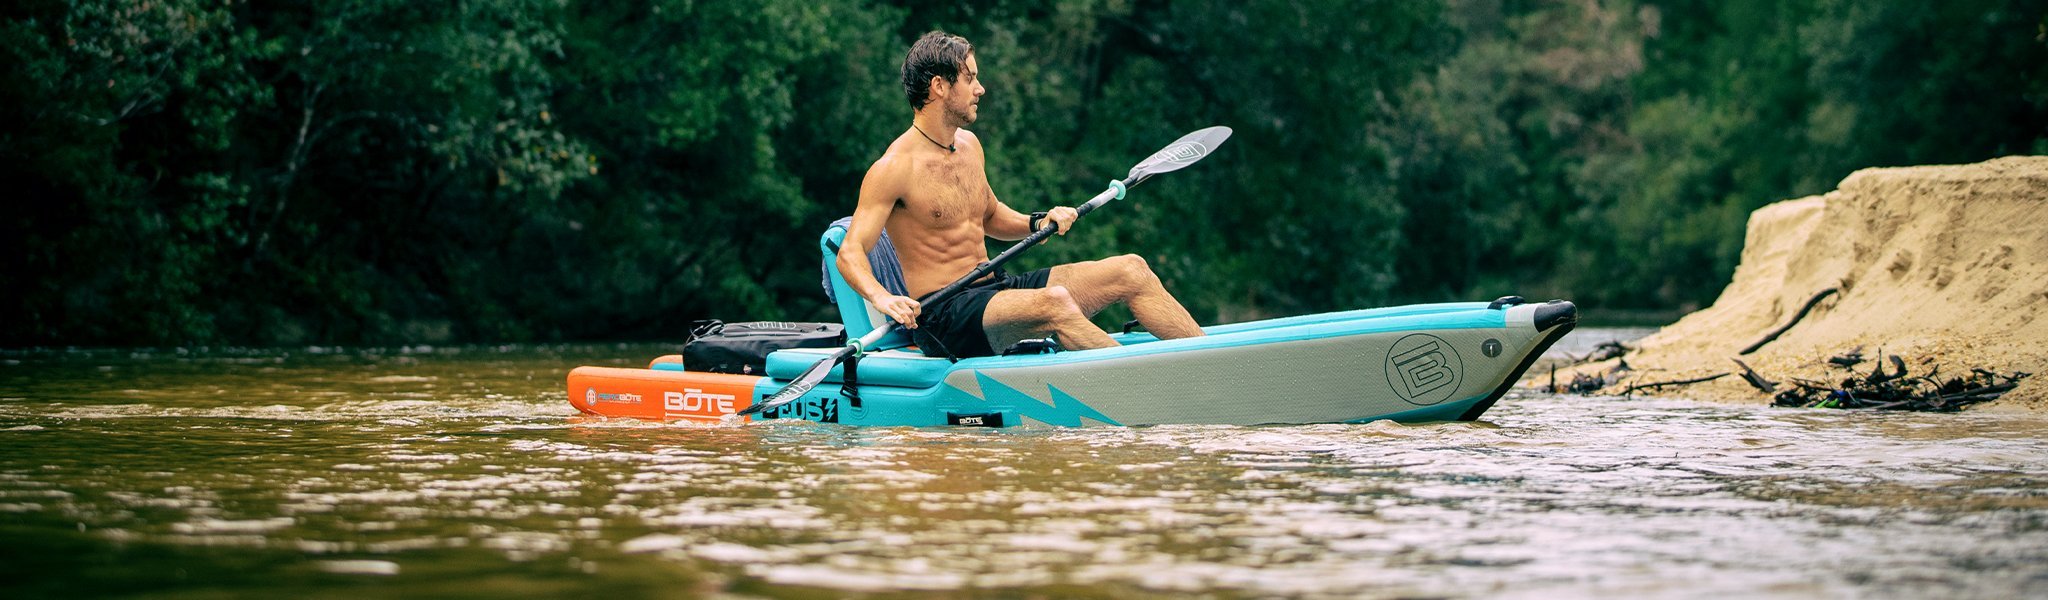 http://www.boteboard.com/cdn/shop/collections/Collection-Hero_Kayaks_Accessories.jpg?v=1622818368